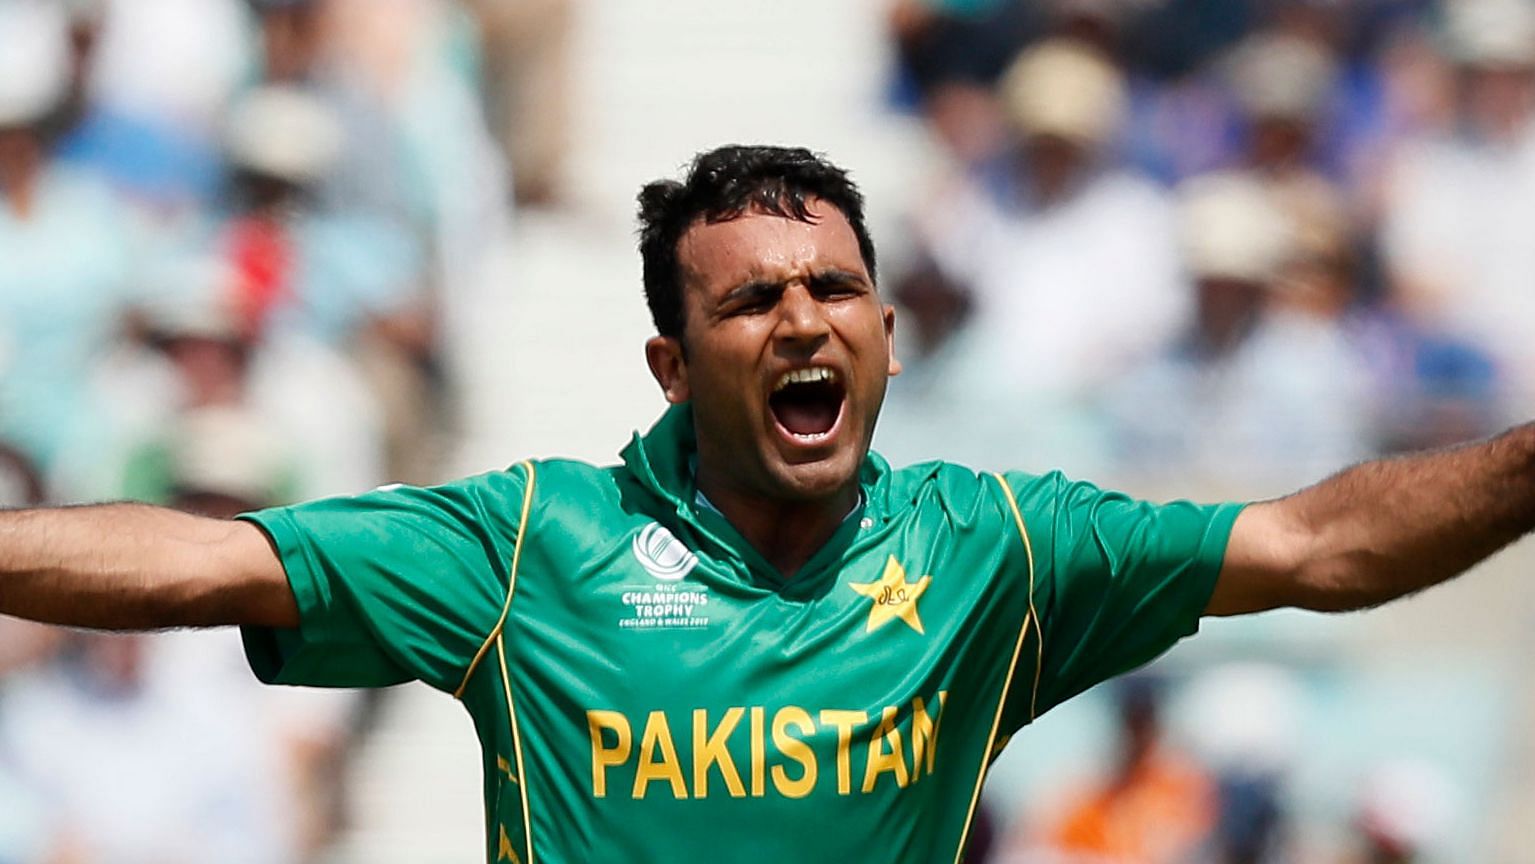 Fakhar Zaman scored a century in the Champions Trophy final 2017. (Photo: AP)